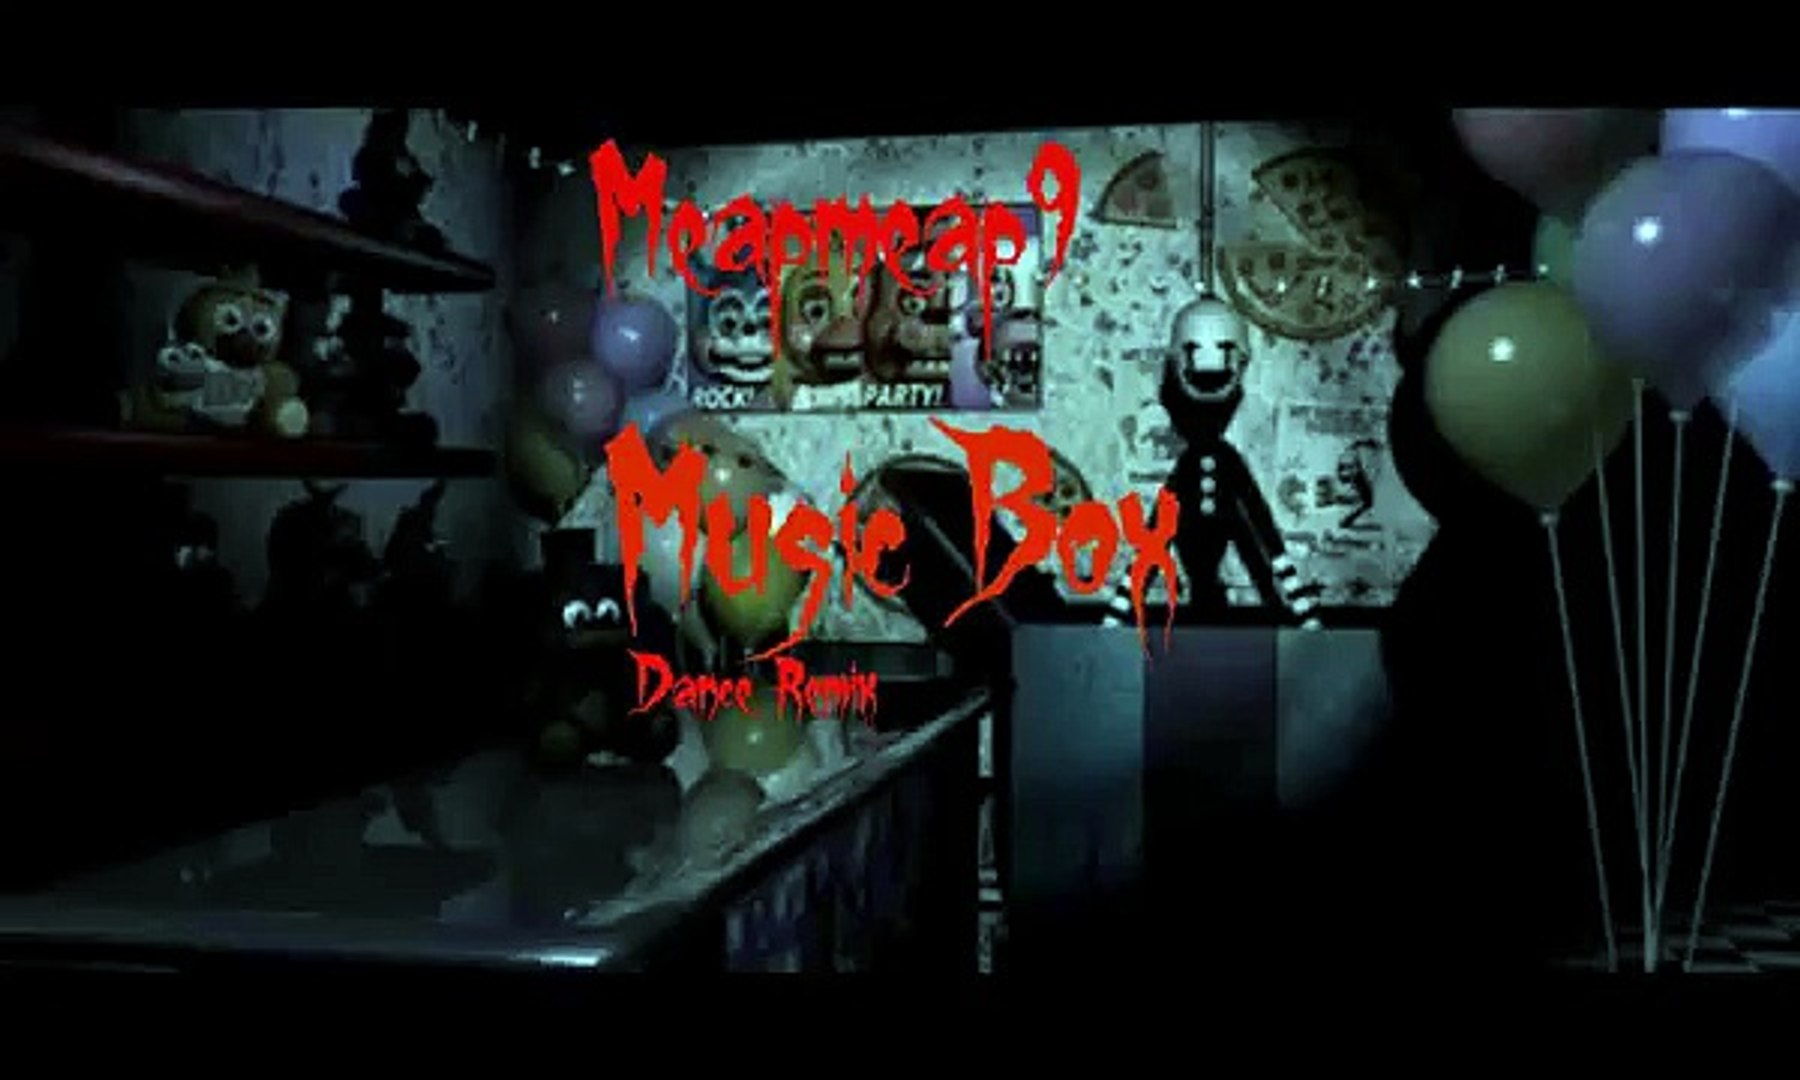 Fnaf 2 Music Box Dance Remix Meapmeap9 Video Dailymotion